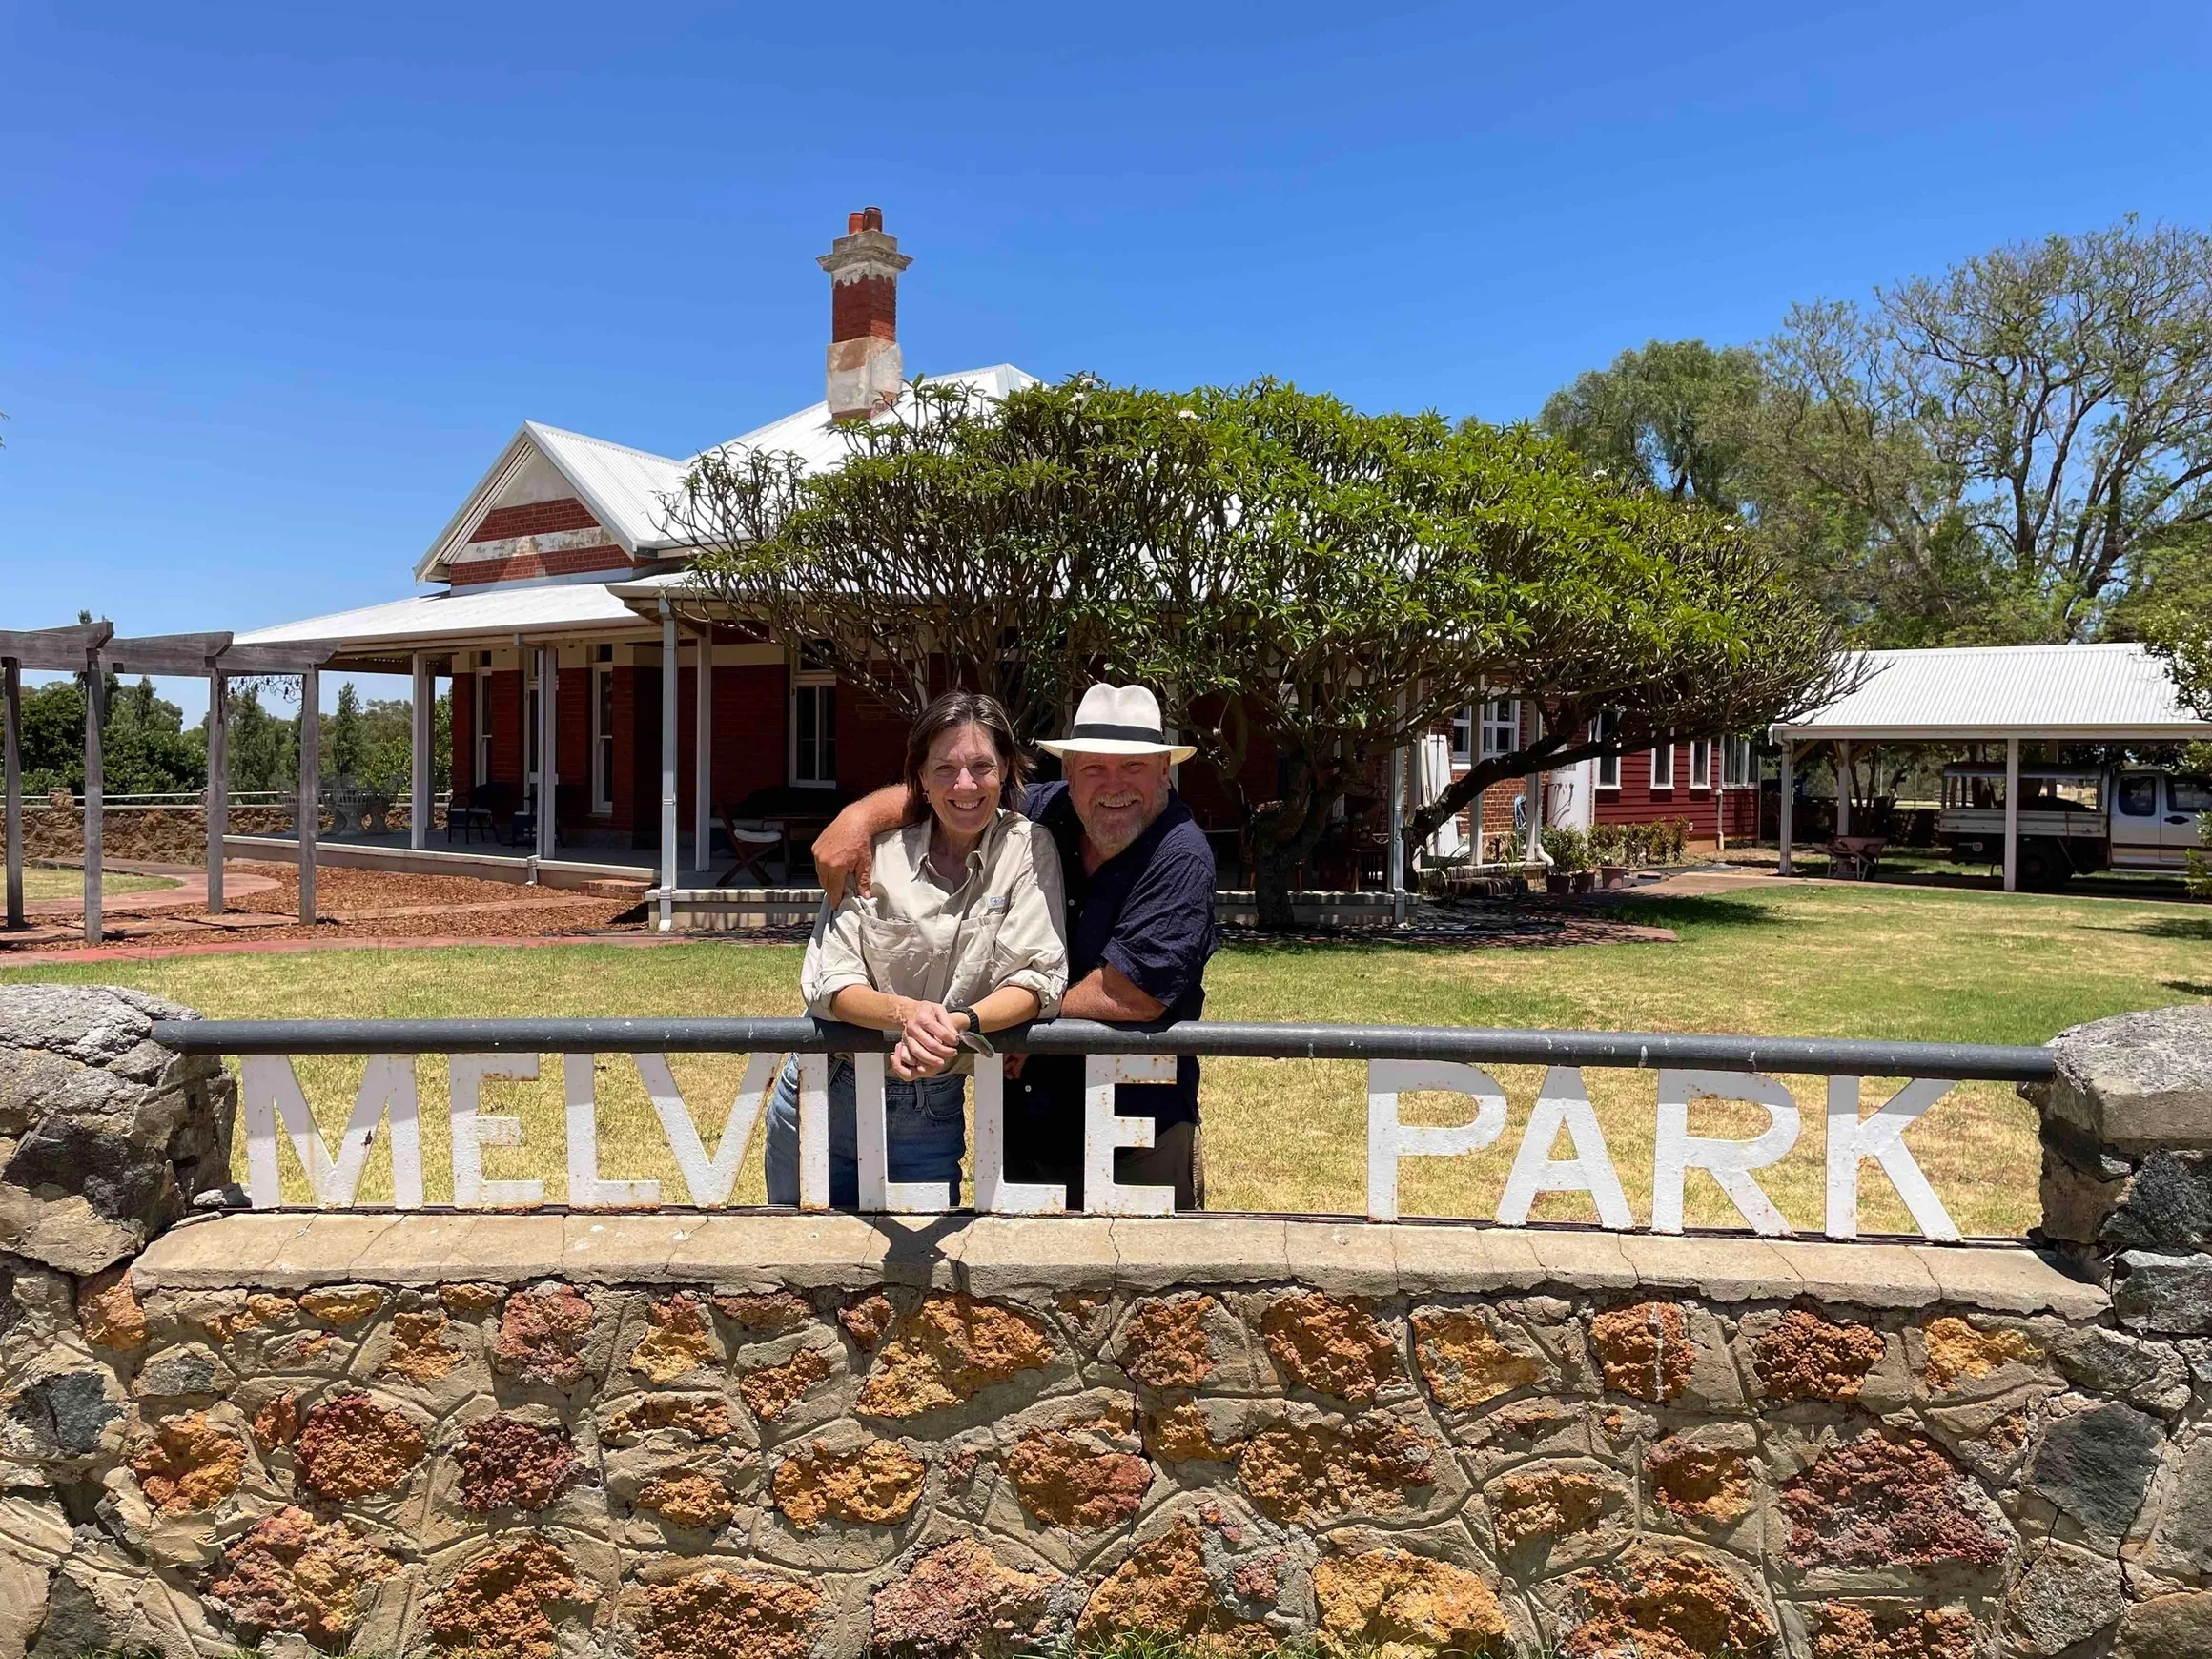 David Doepel and wife Barbara Connell are co-custodians of historic Melville Park Farm, where they’re collaborating with researchers and local businesses to add value to primary produce.